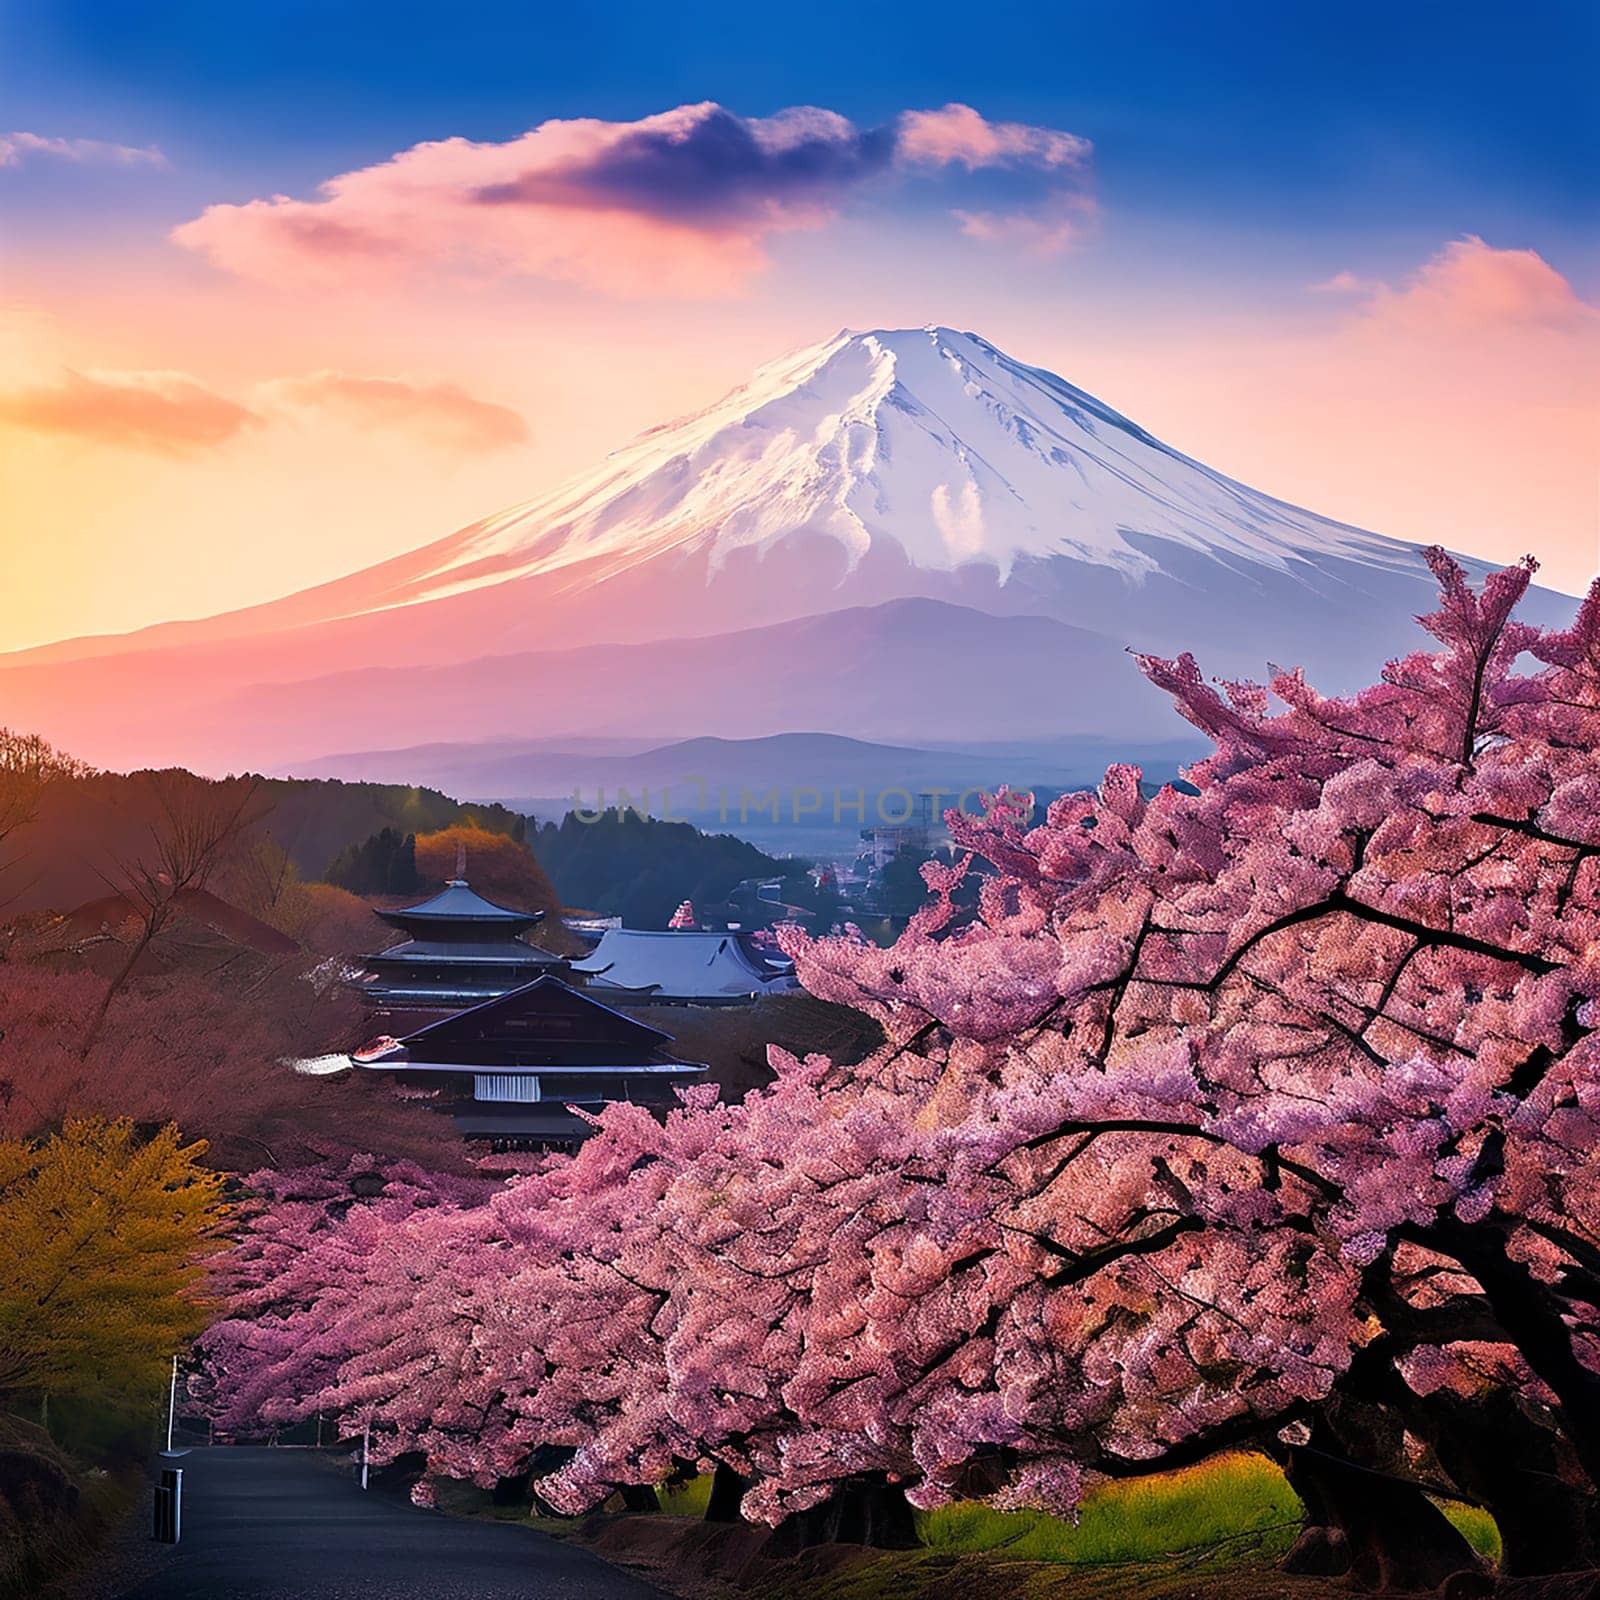 Breathtaking Beauty: Fuji Mountain and Cherry Blossoms in Spring, Japan